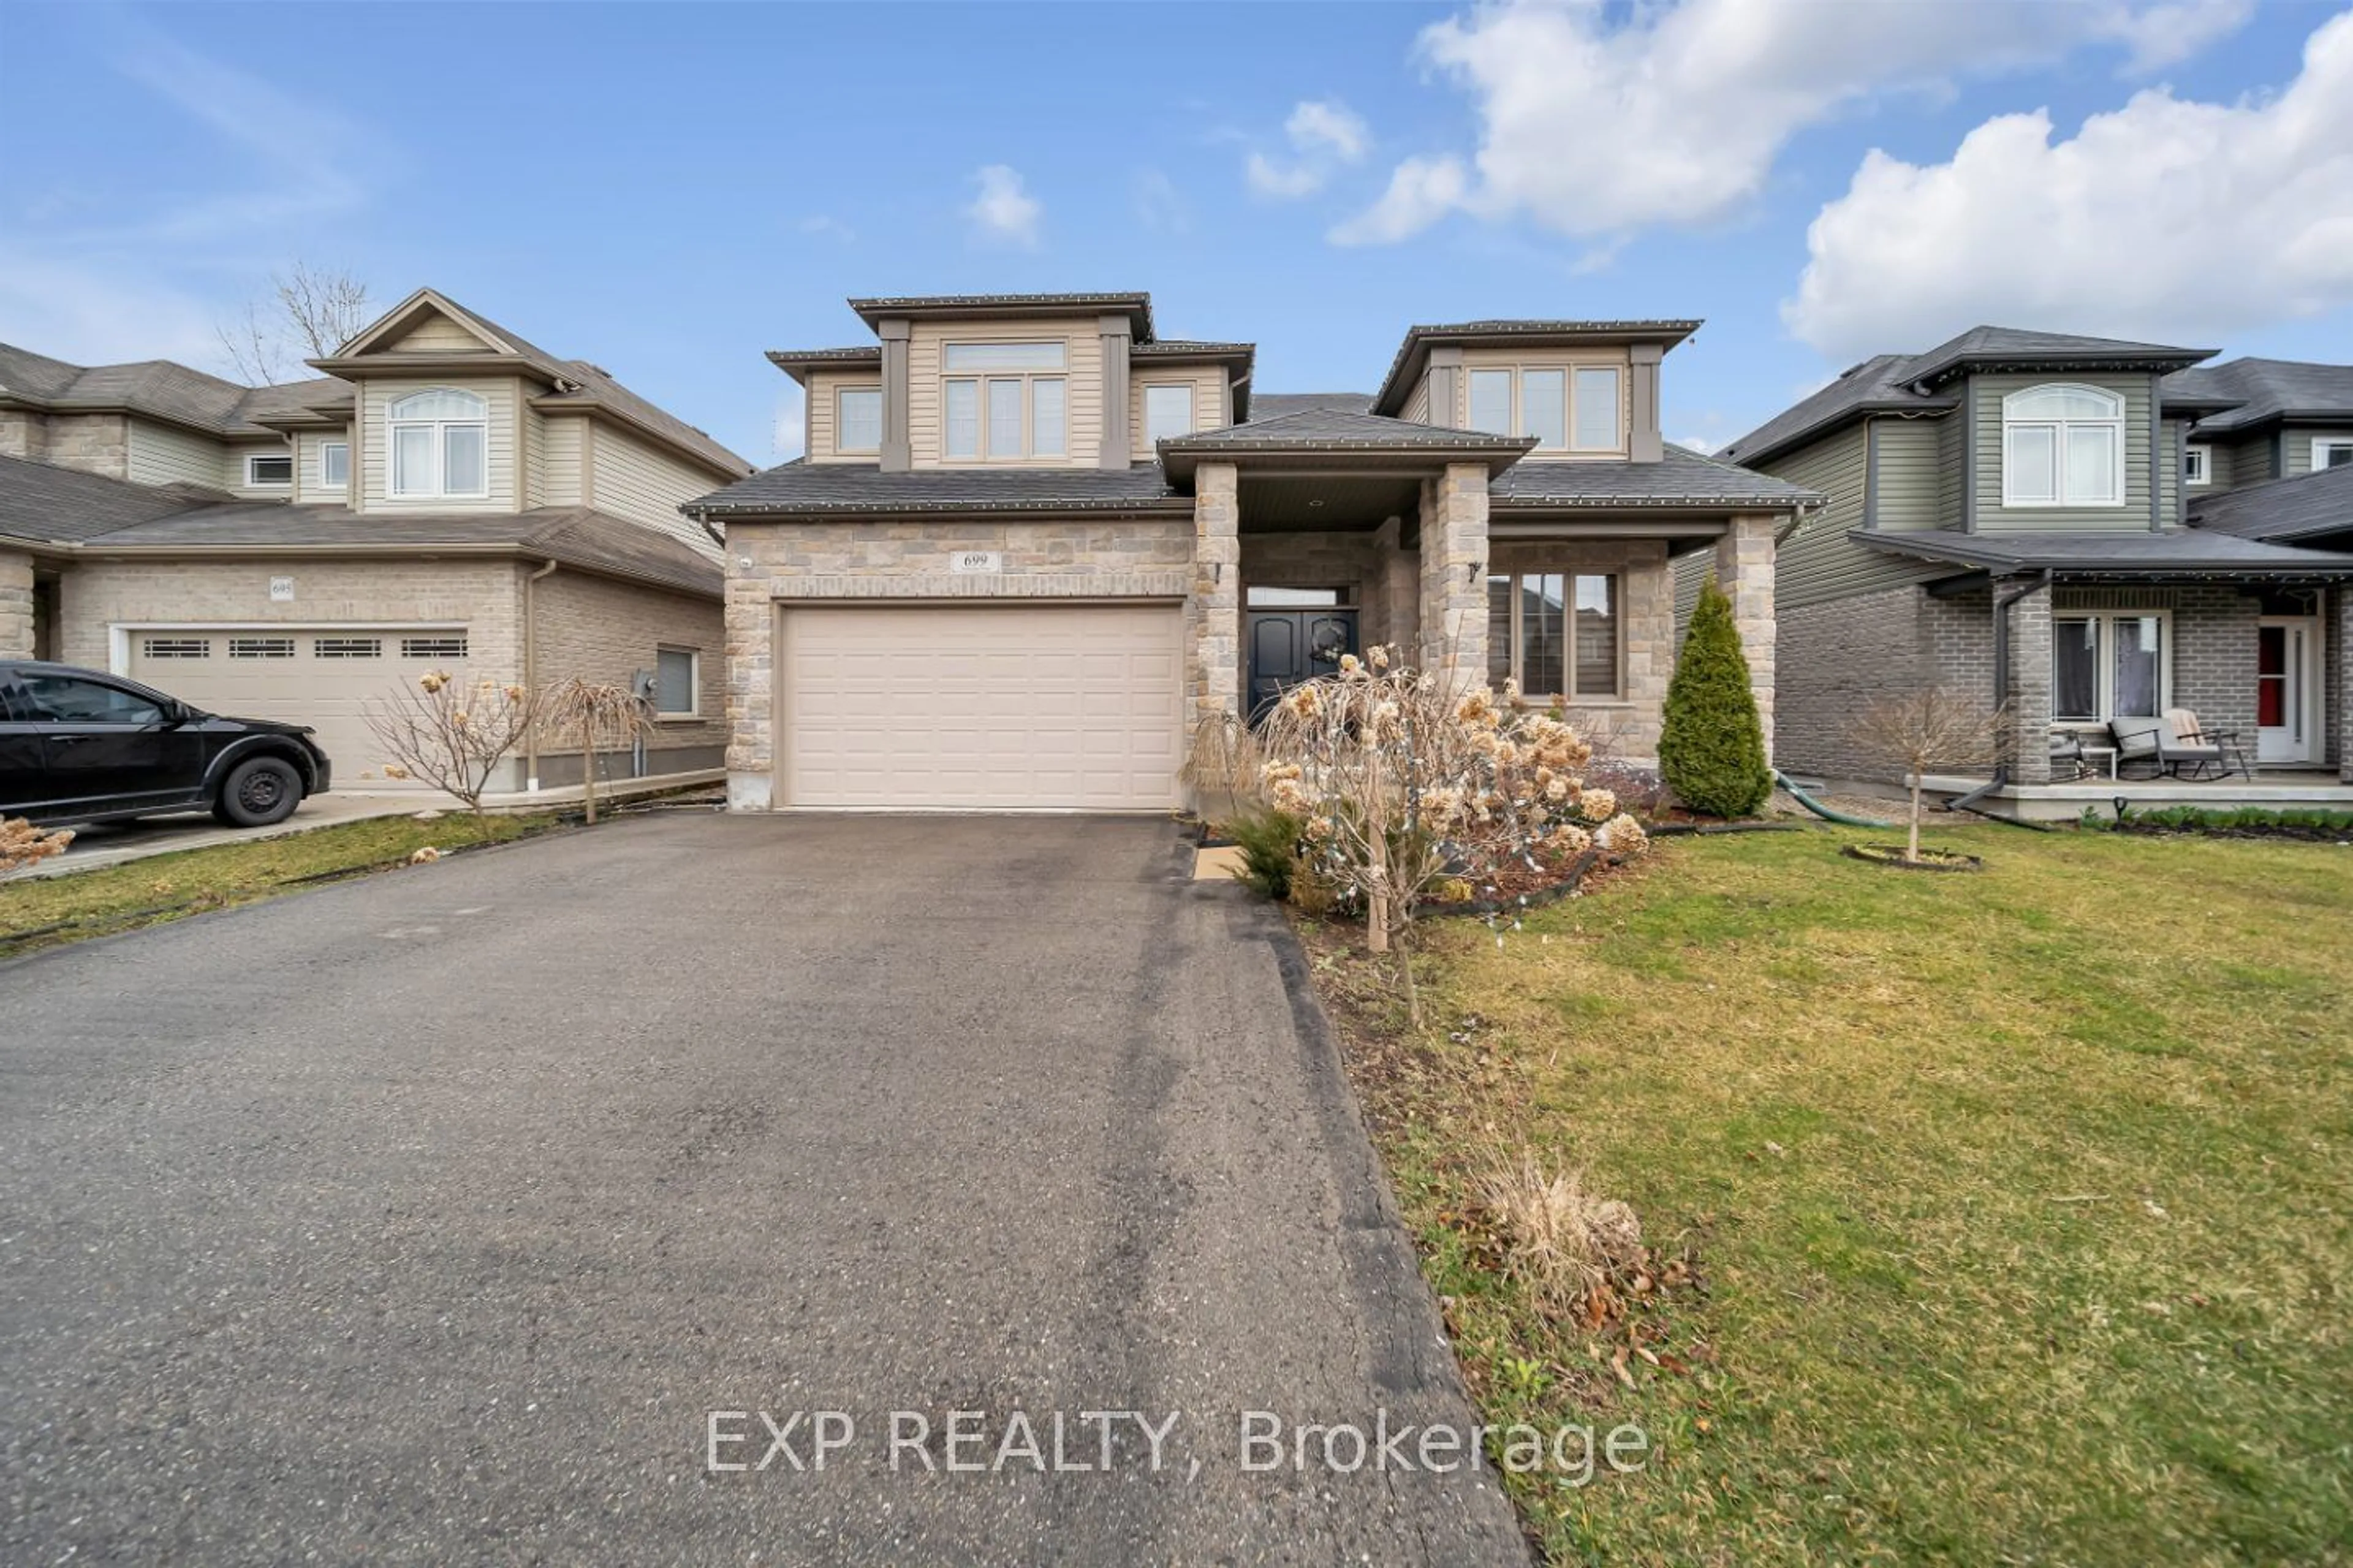 Frontside or backside of a home for 699 Normandy Dr, Woodstock Ontario N4T 0C5